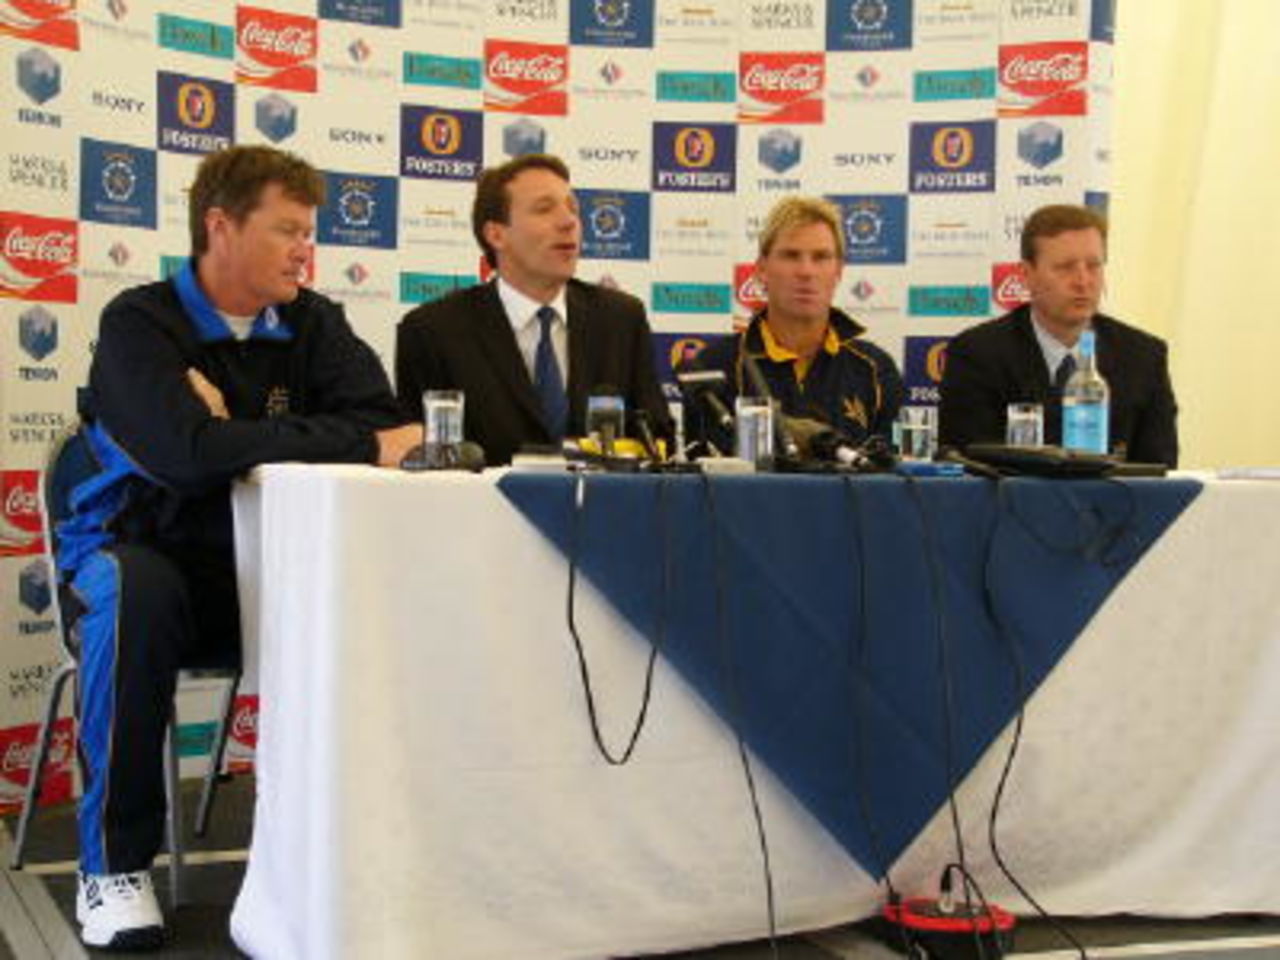 Shane Warne, flanked by Paul Terry (Team Manager), Nick Pike (Managing Director, Rose Bowl plc) and Tim Tremlett (Director of Cricket).